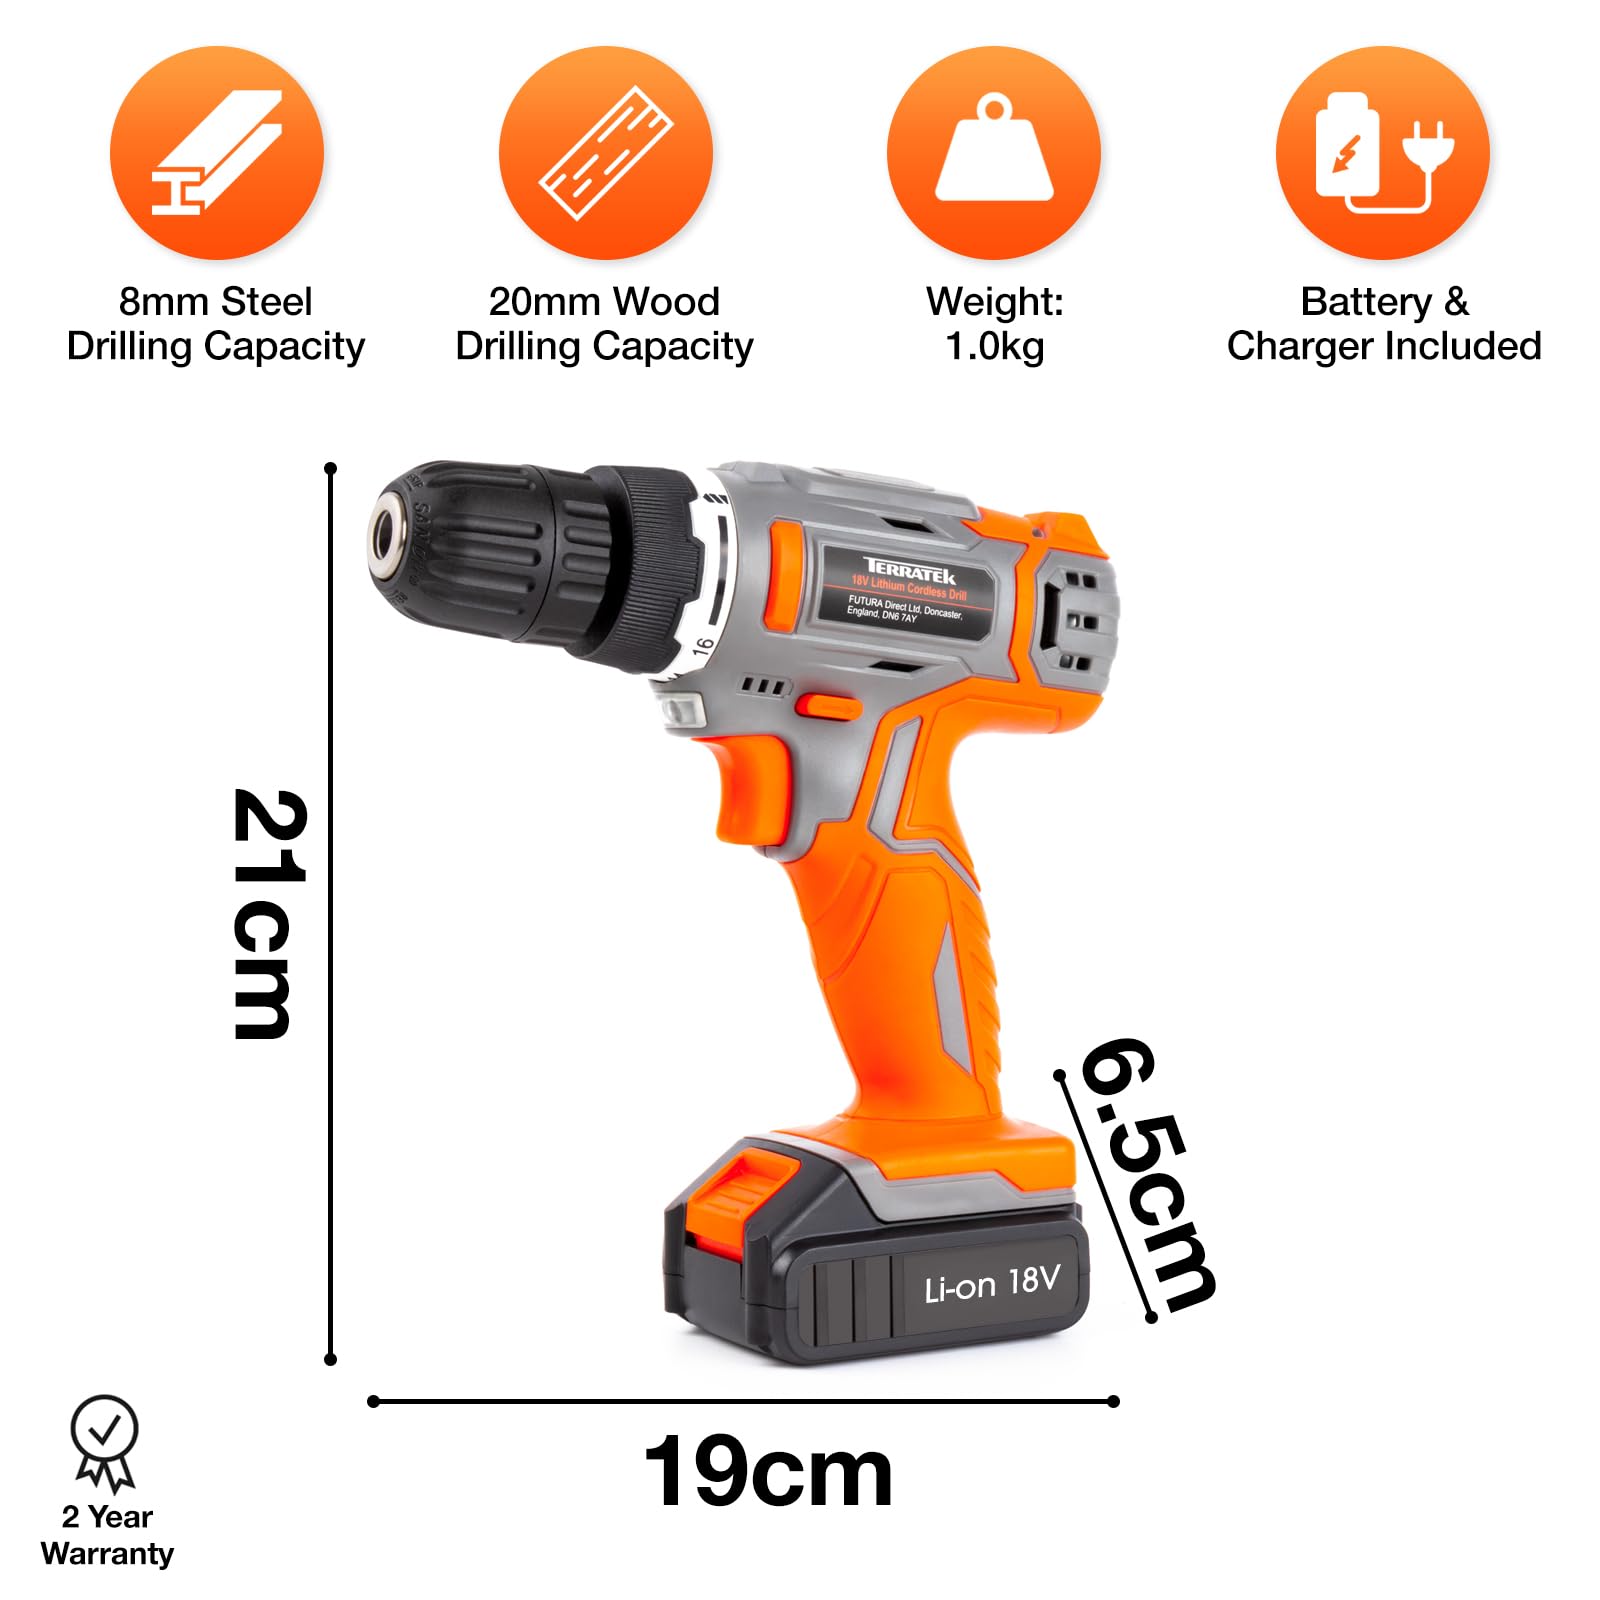 Terratek 13Pc Cordless Drill Driver 18V/20V-Max Lithium-Ion, Electric Screwdriver, Accessory Kit, LED Work Light, Quick Change Battery & Charger Included